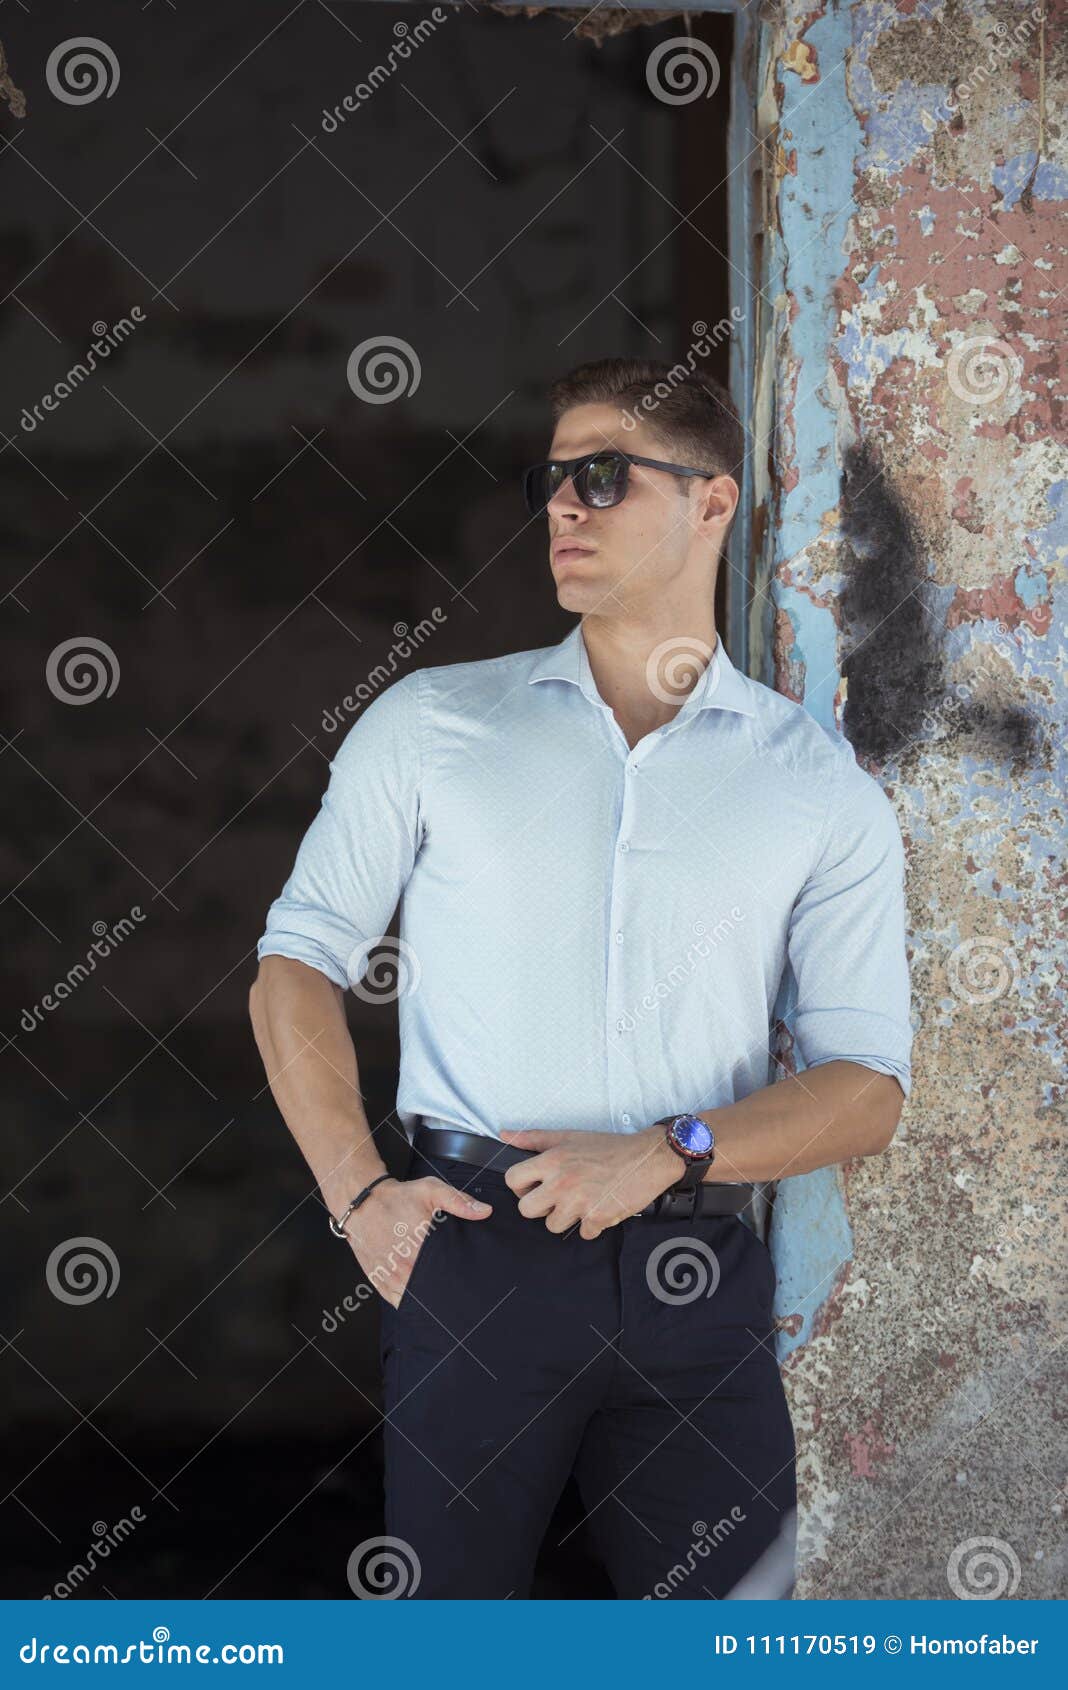 Fashion Handsome Young Man with Cuffed Sleeves Stock Image - Image of ...